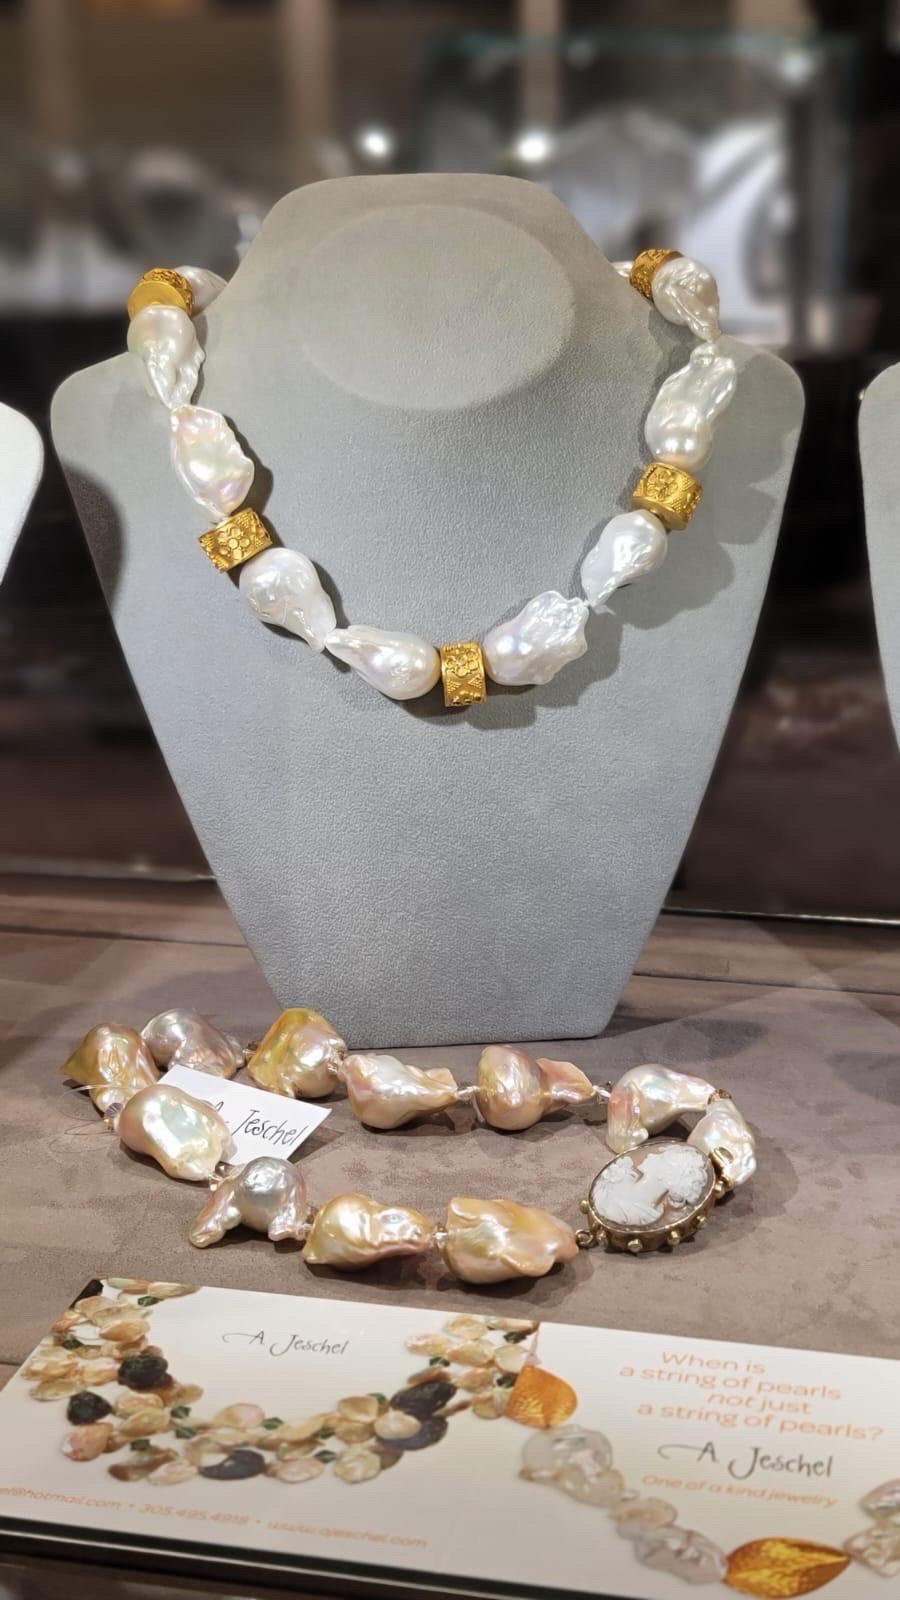 One-of-a-Kind

What could be simpler or more beautiful?
17-22 m.m Fine quality super lustrous white Pearls says it all. This is just a show-stopping Pearl necklace. The pearls are accented with Filigree vermeil rondels. The clasp is a simple Swiss